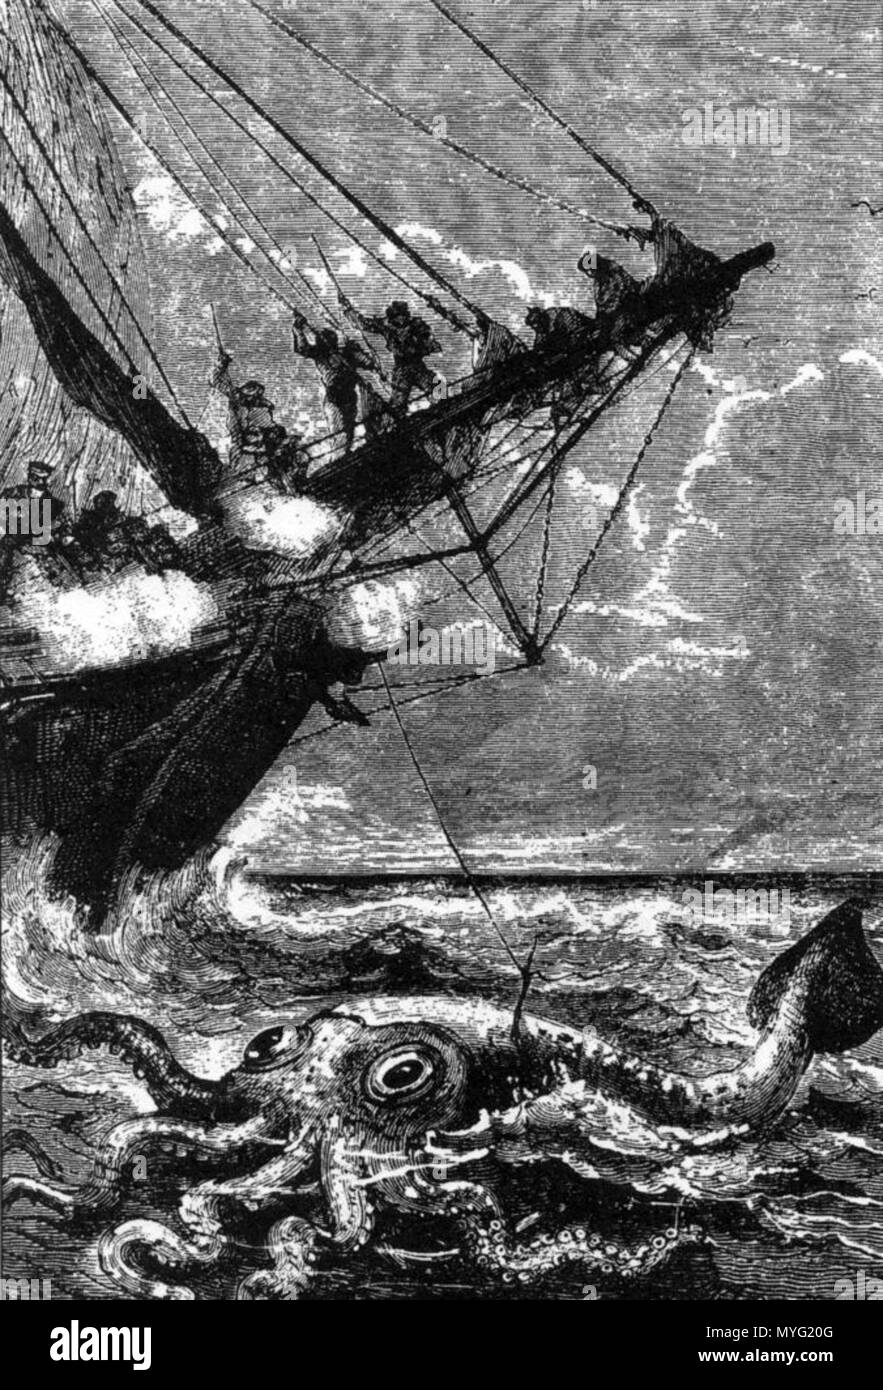 . Illustration of a giant squid from 20000 Lieues Sous les Mers by Jules Verne. 1870. Alphonse de Neuville and Edouard Riou 210 Giant squid twenty thousand leagues under the sea Stock Photo